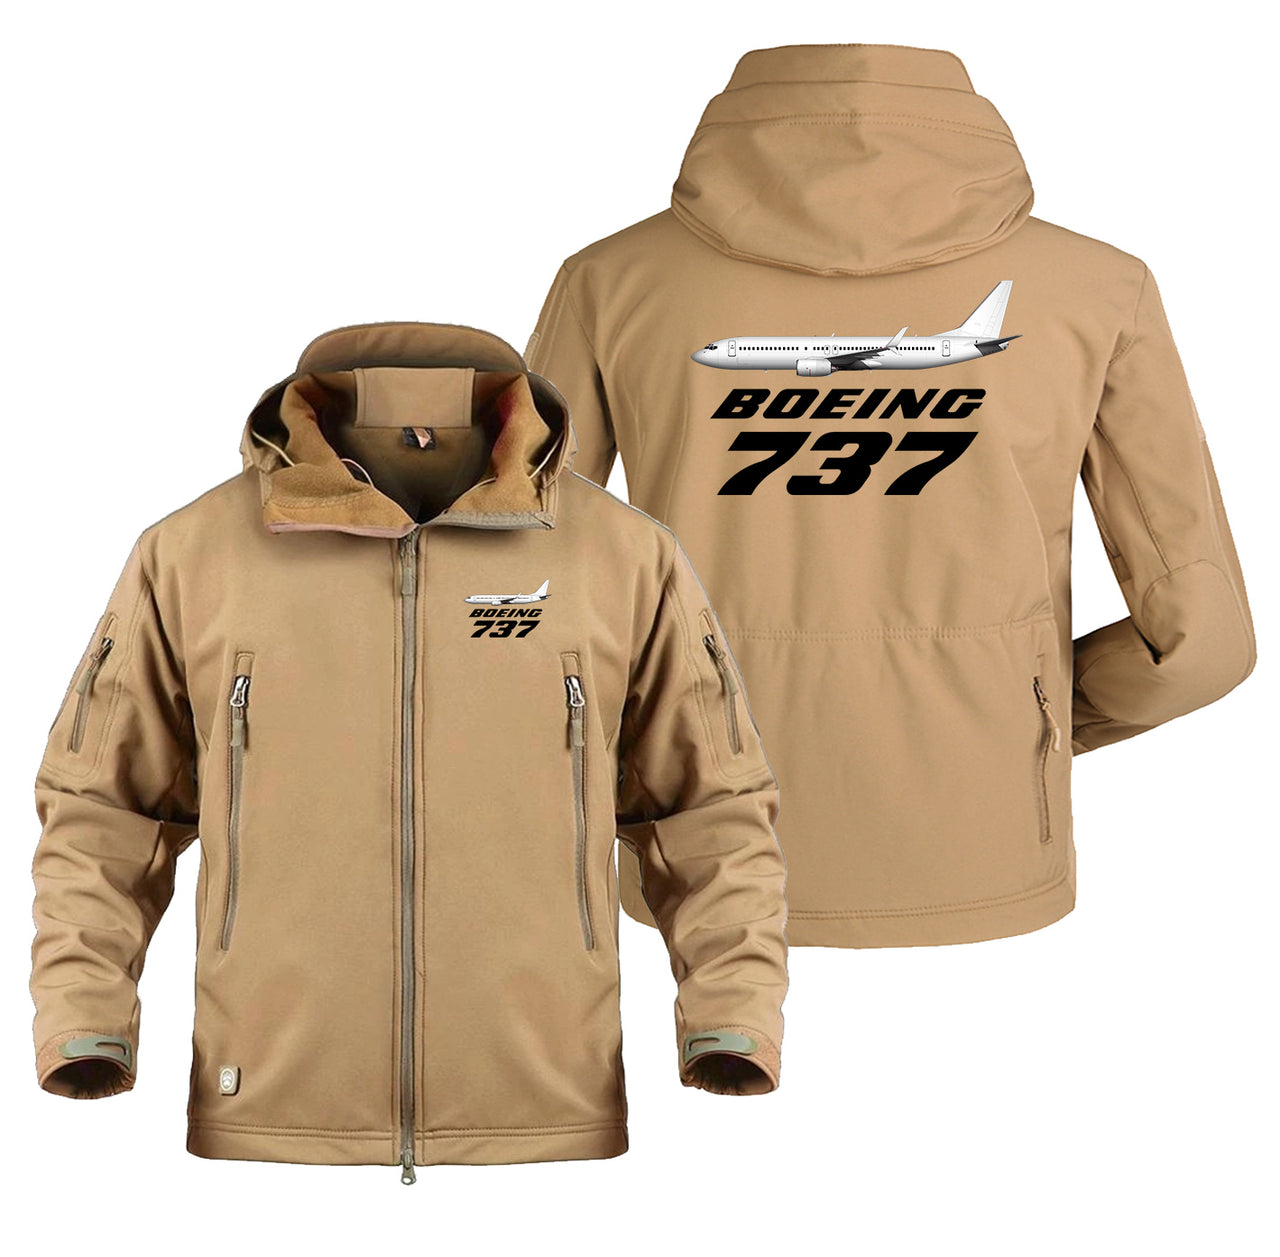 The Boeing 737 Designed Military Jackets (Customizable)